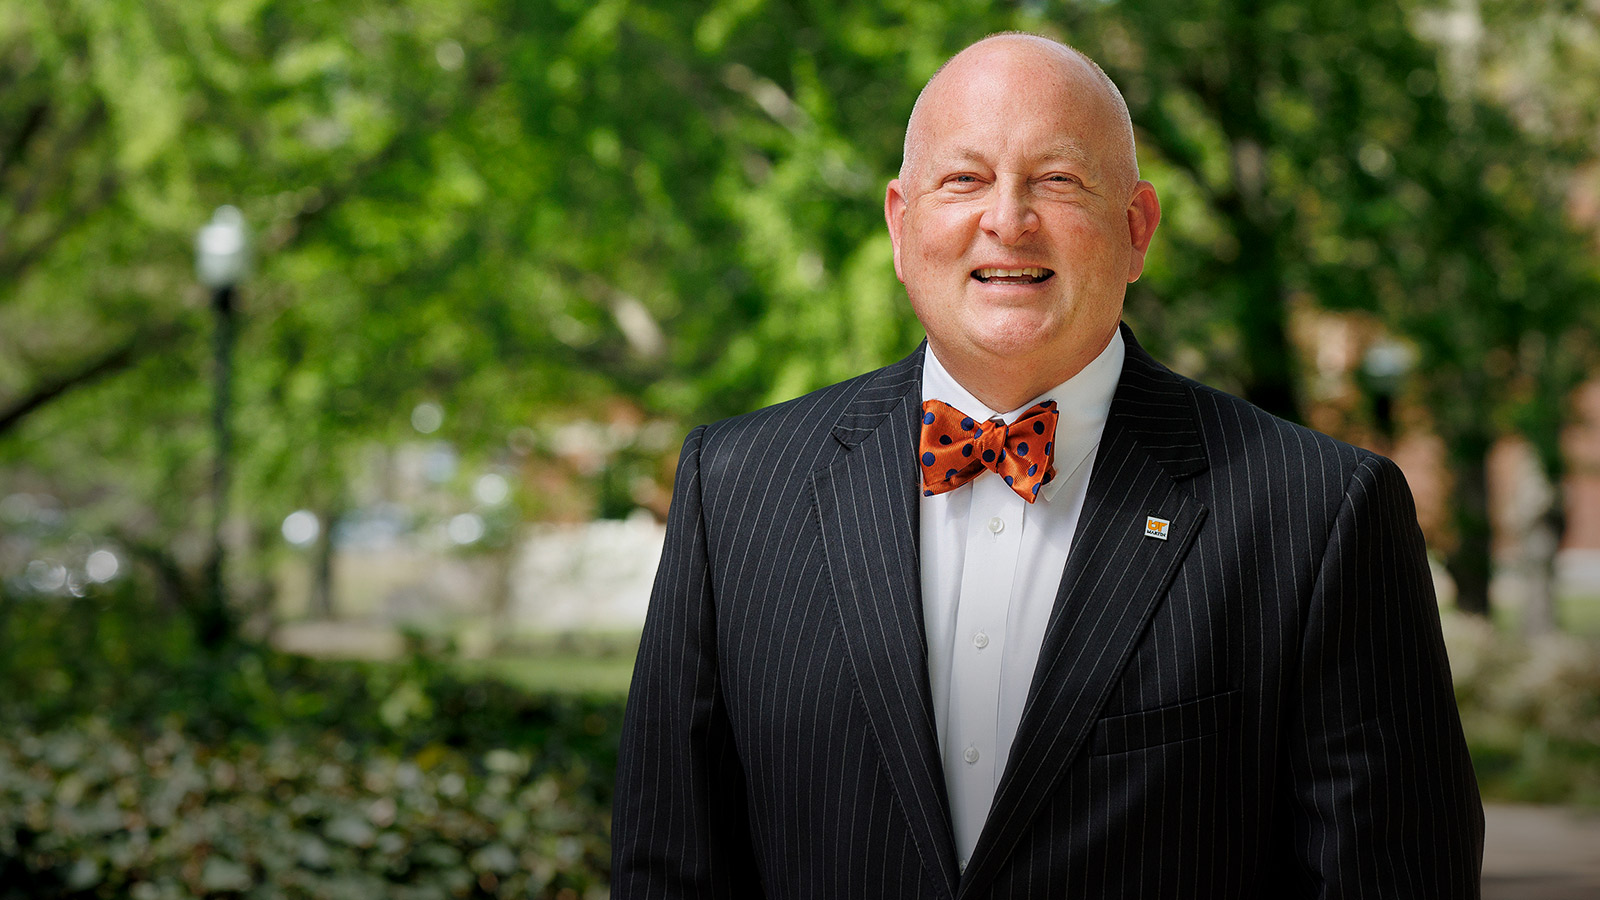 Keith Carver to be Recommended as Permanent UT Institute of Agriculture Senior Vice Chancellor and Senior Vice President